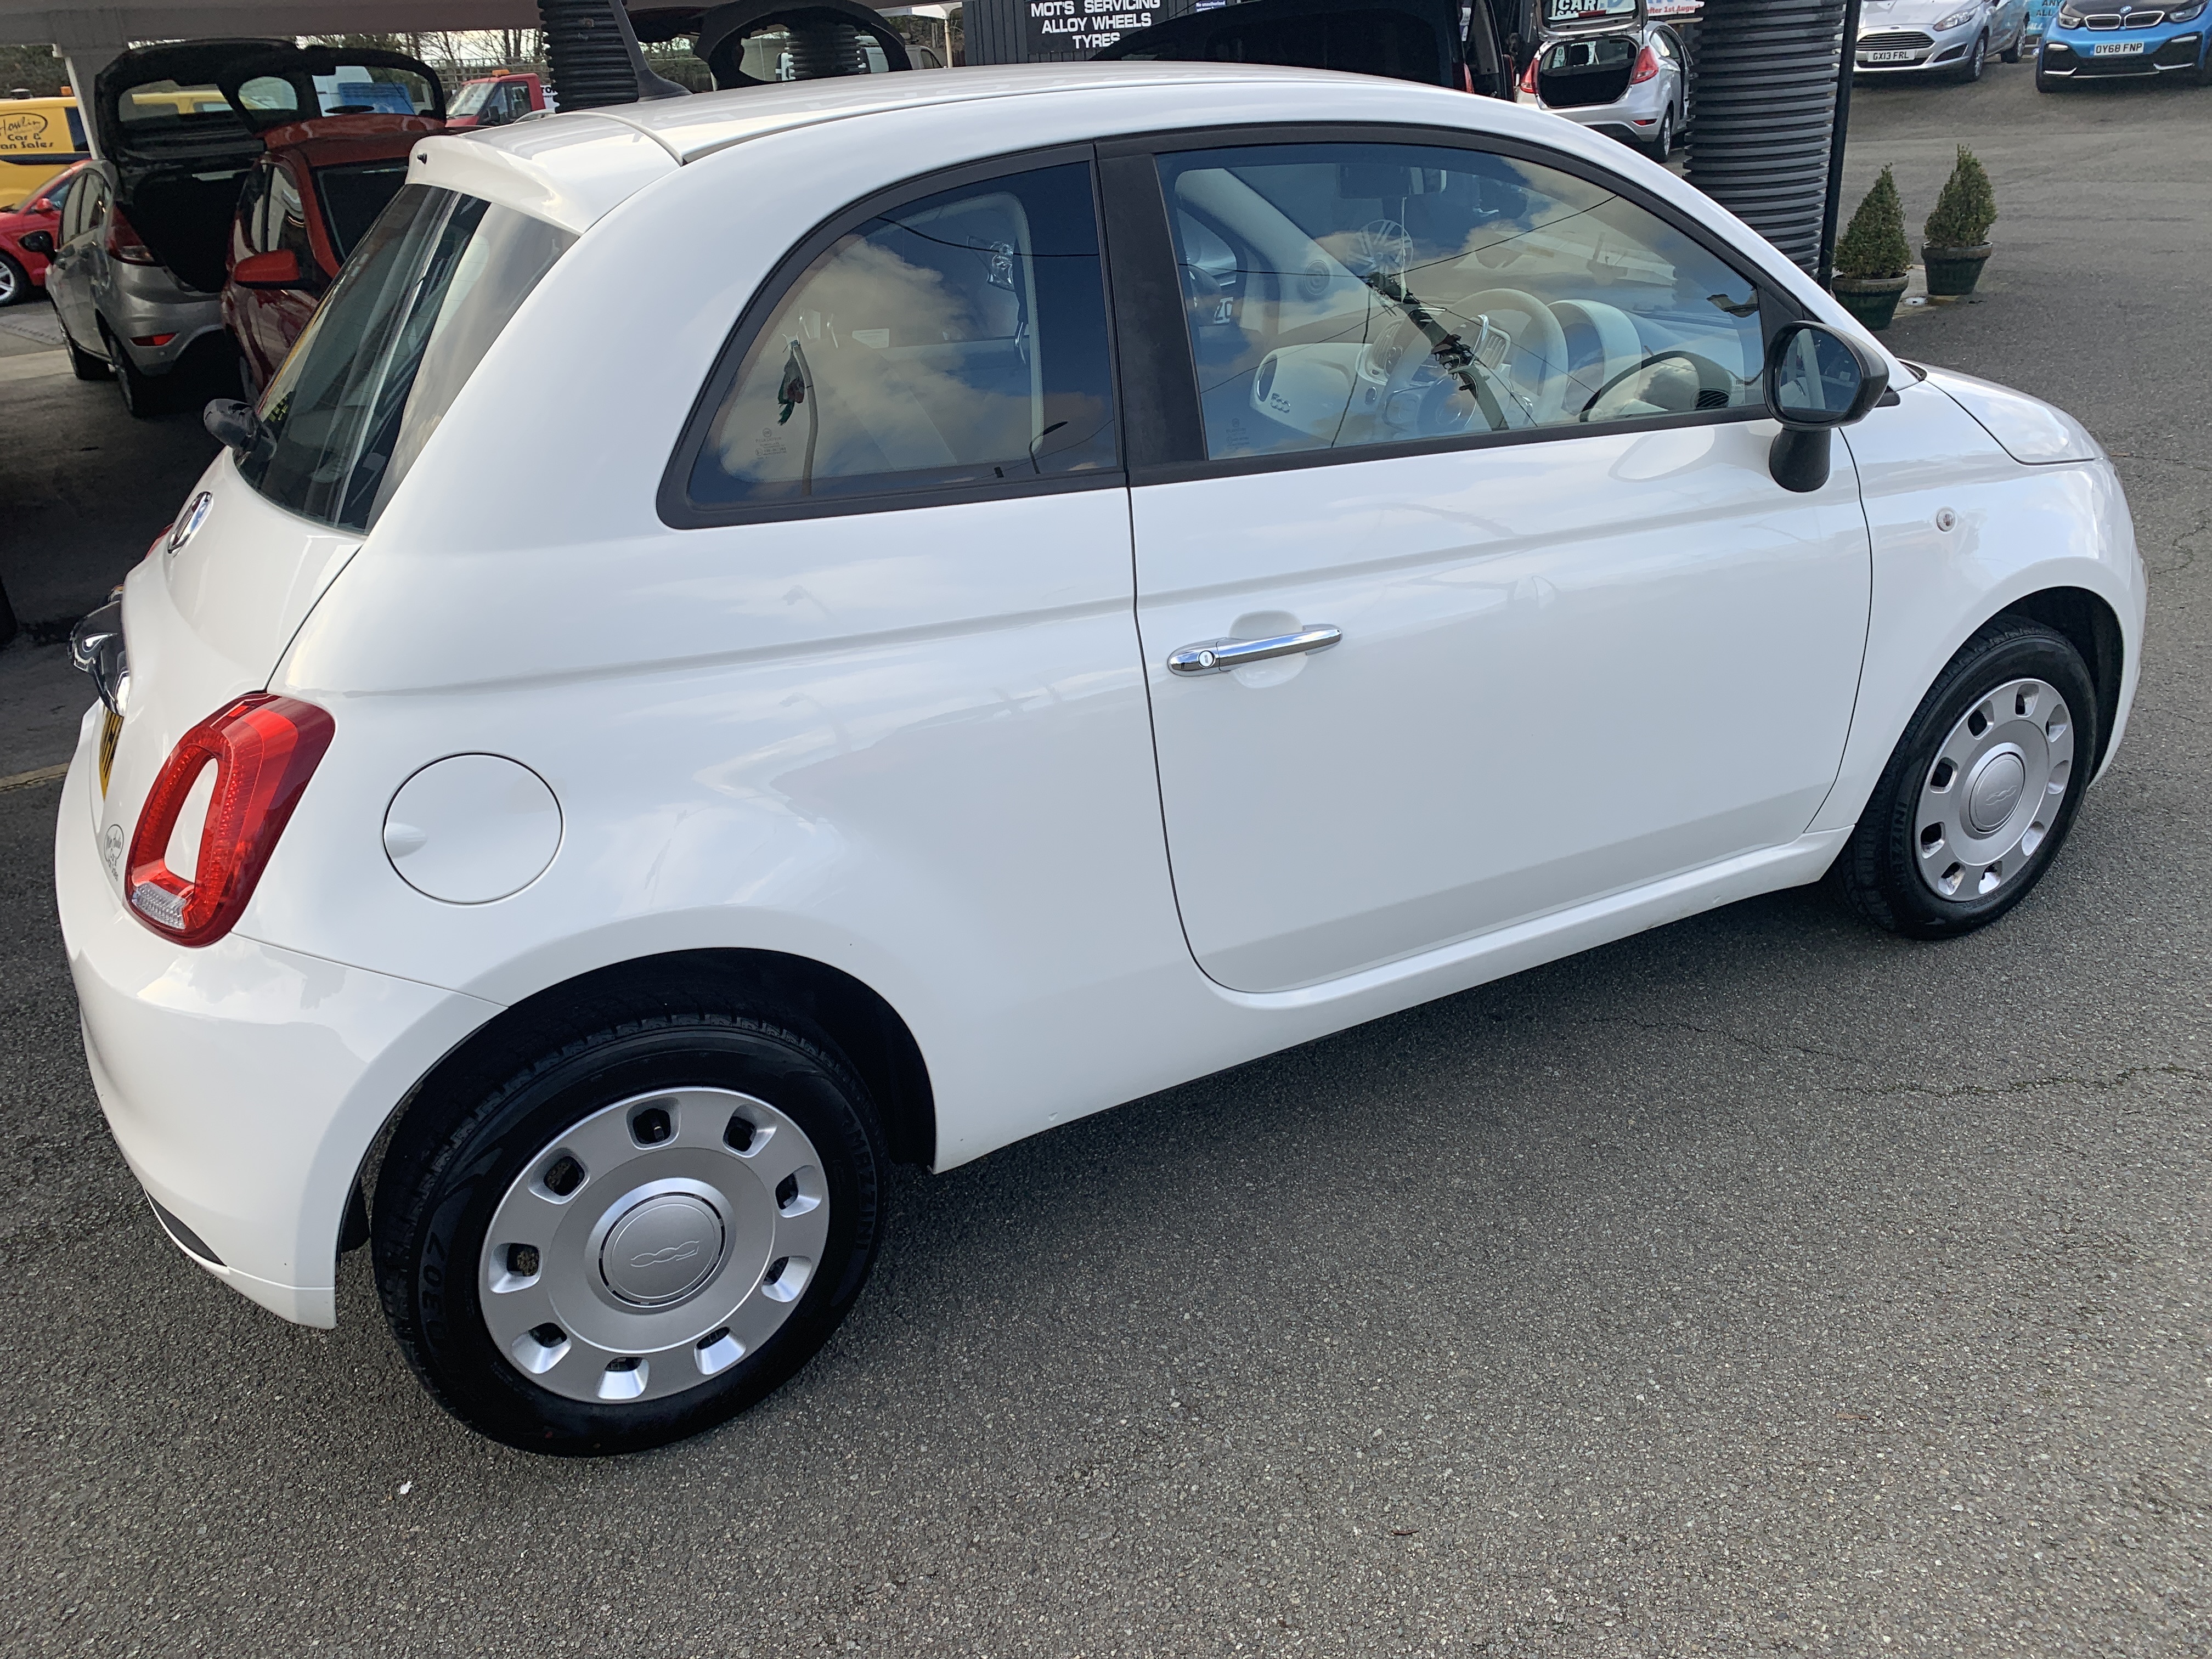 Fiat 500 POP  for sale at Mike Howlin Motor Sales Pembrokeshire